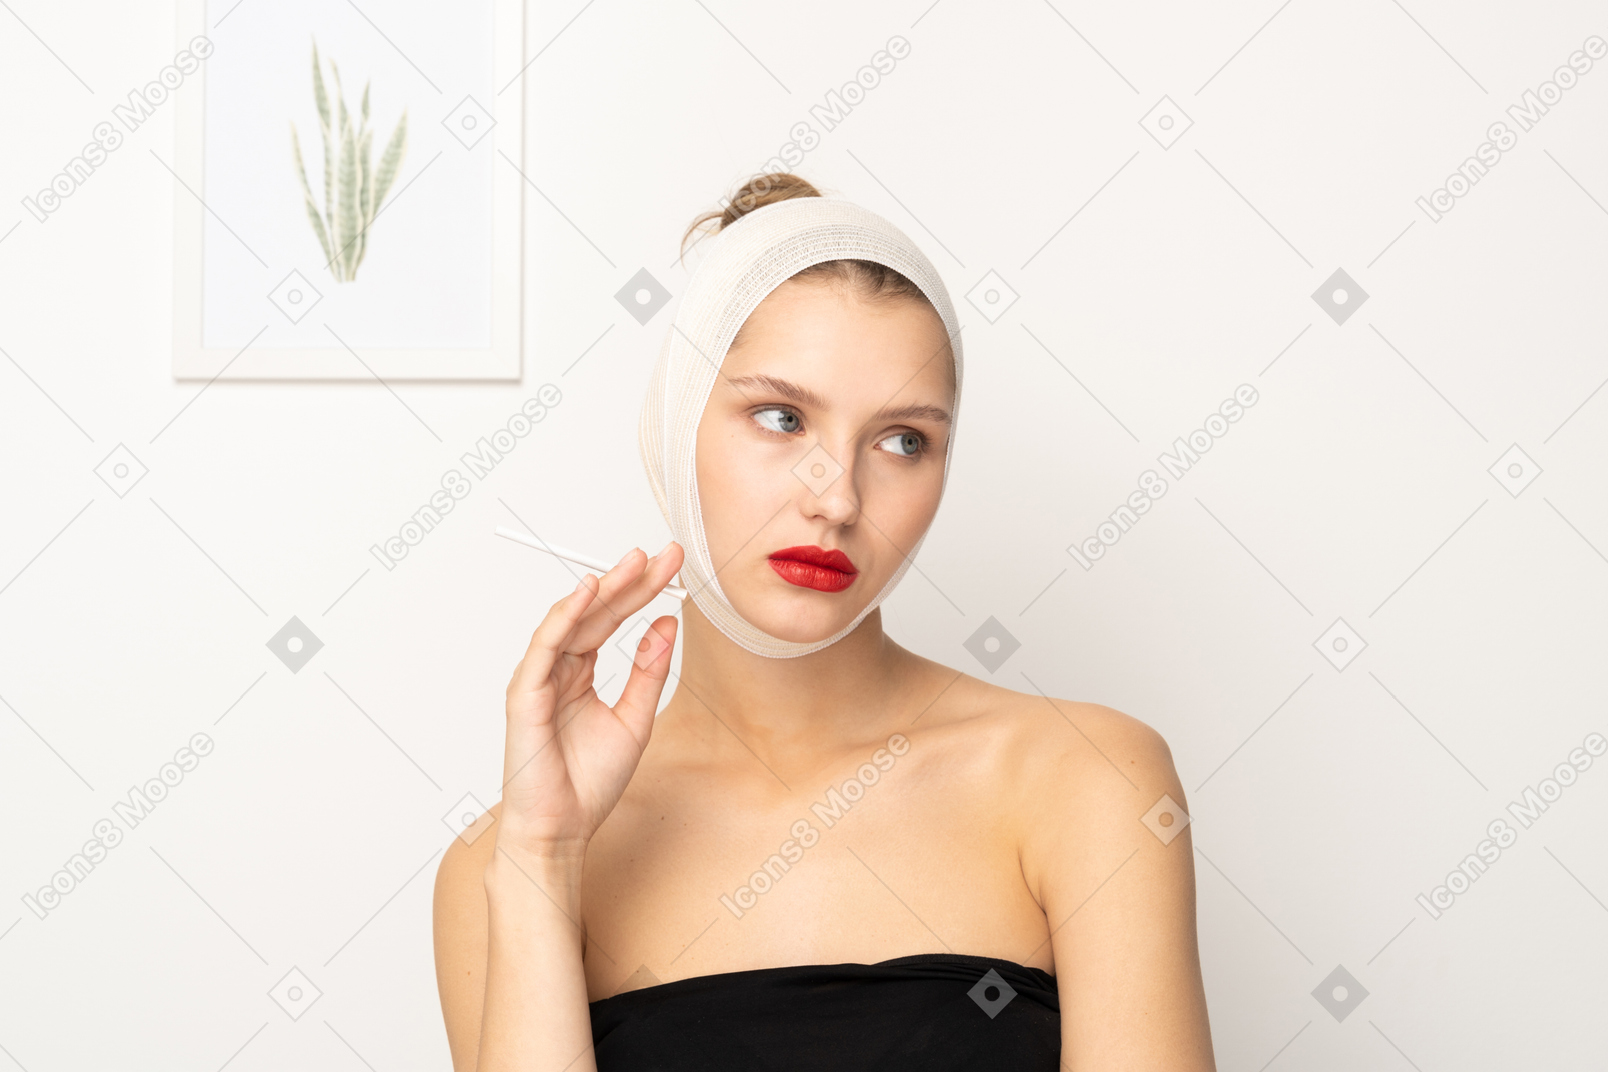 Woman with bandaged head raising one hand